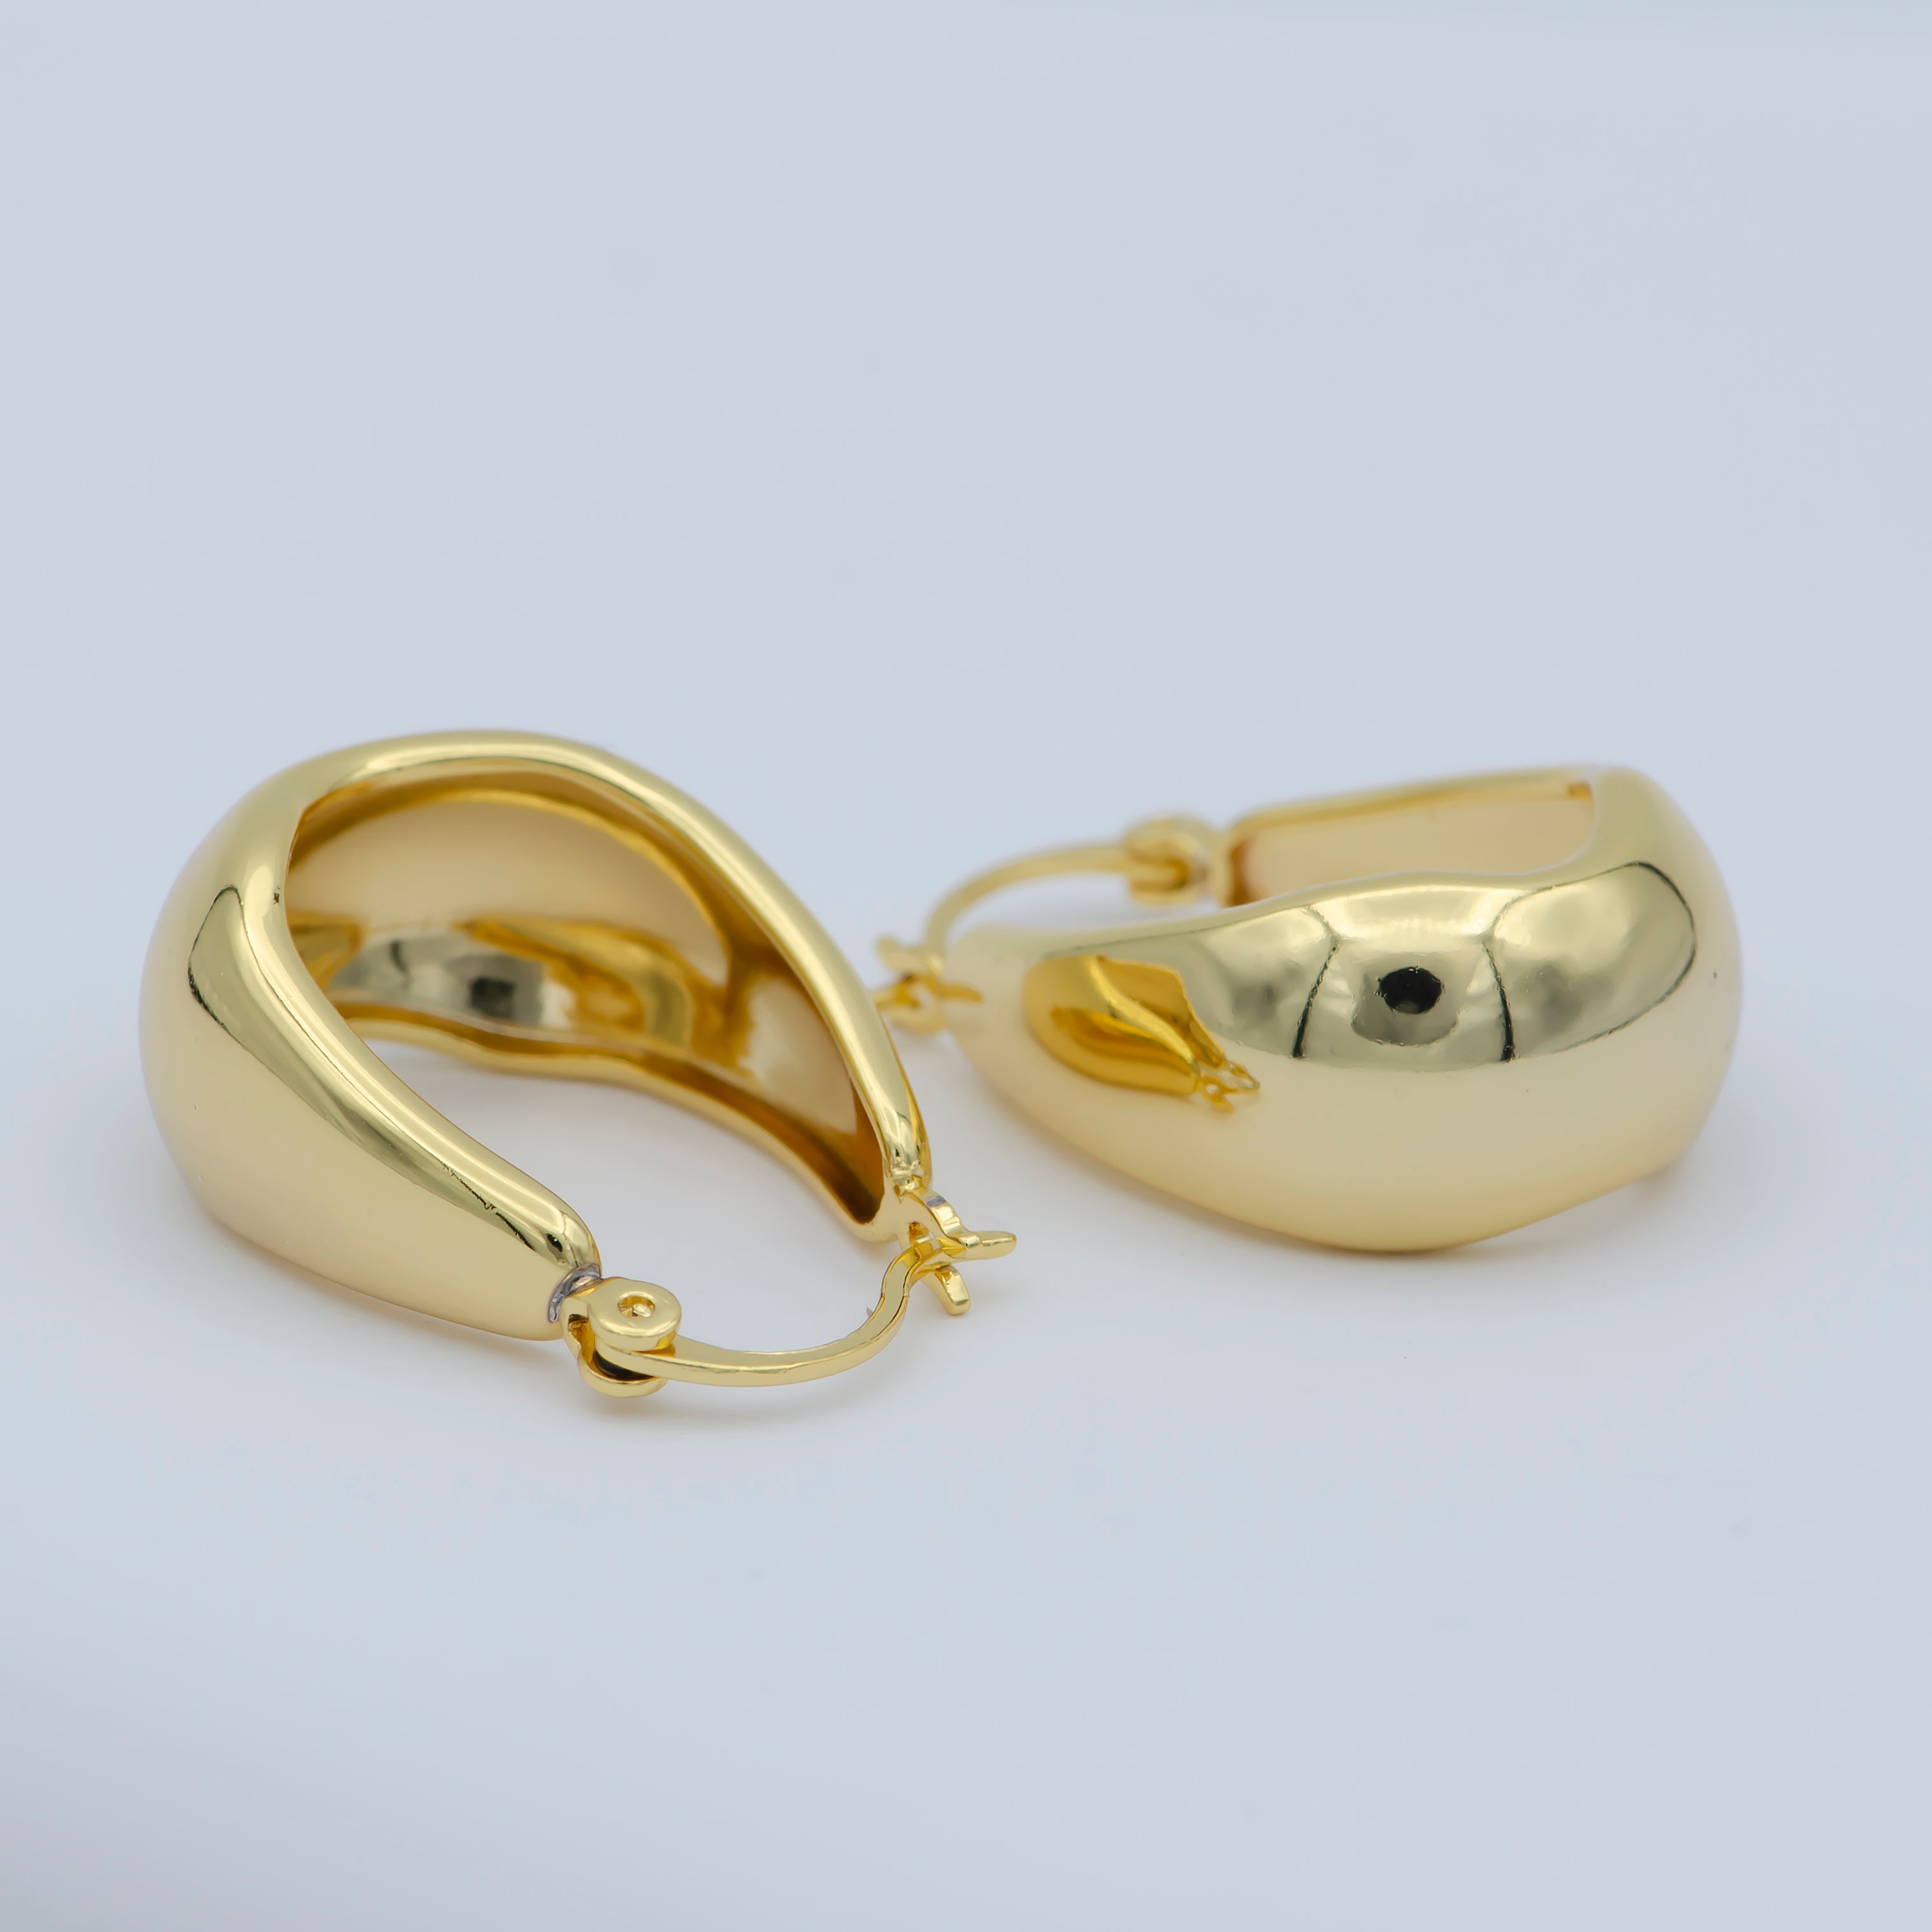 24k Gold Filled Thick Hoops - Gold Thick Hoop Earrings - Chunky Thick Hoops - Light Weight Hoops Dome Earring P264 - DLUXCA